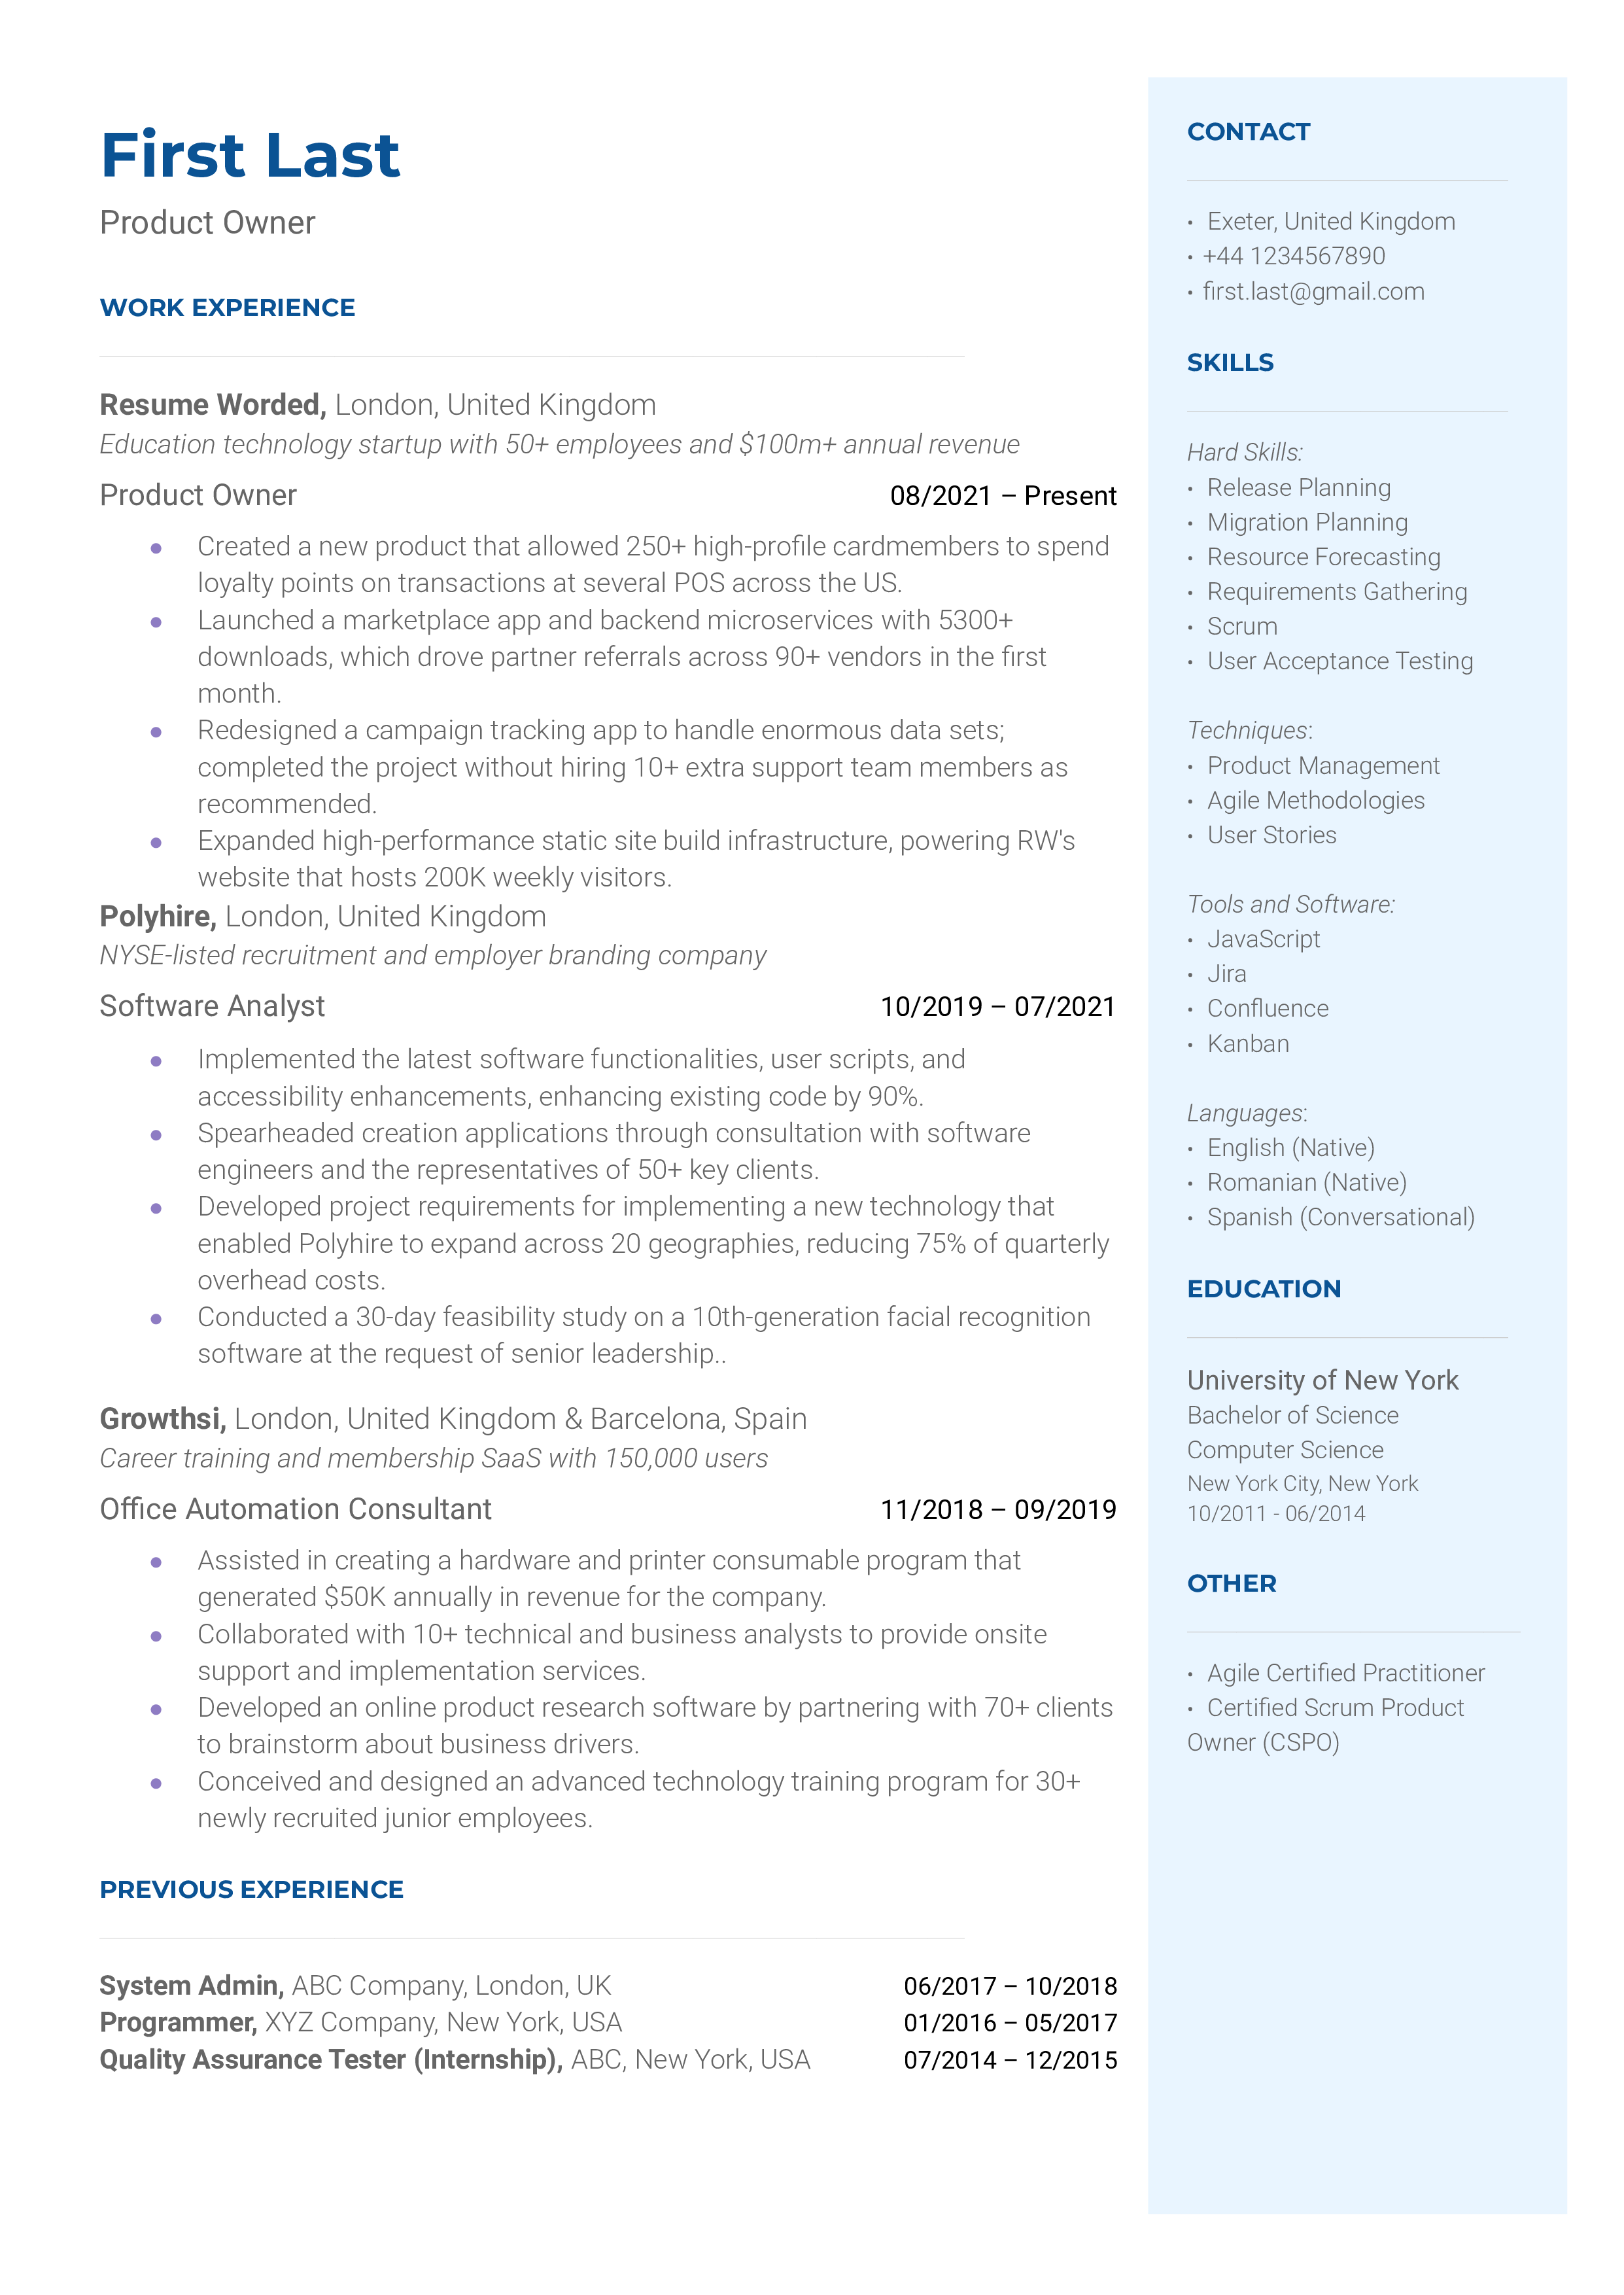 Product Owner CV showcasing Agile proficiency and decision-making skills.